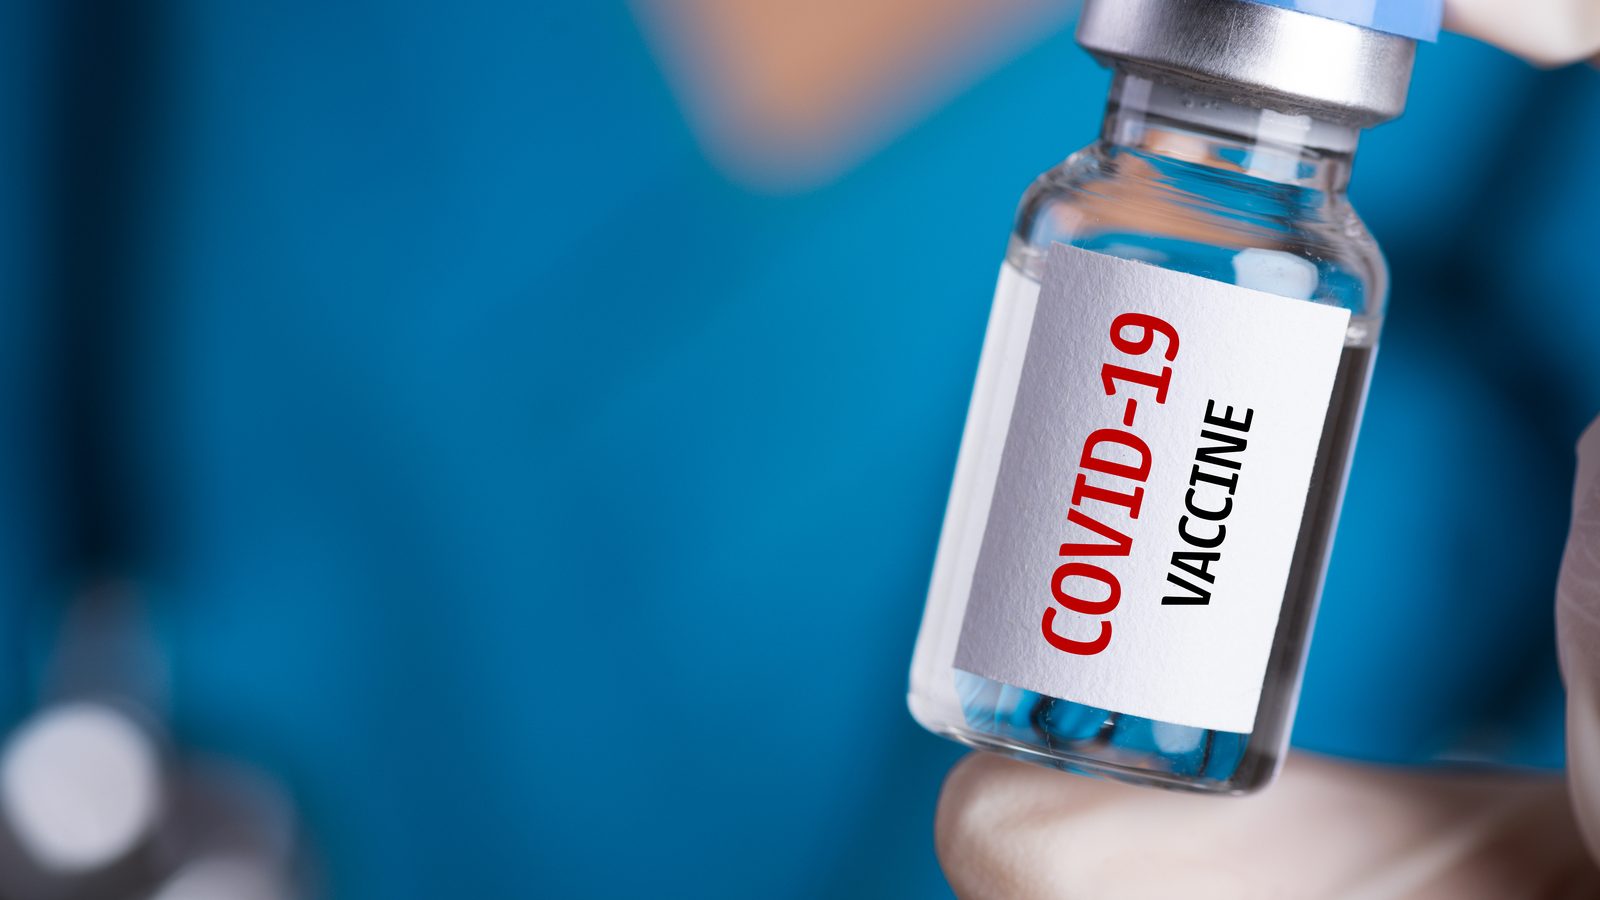 Pima County Discusses Making Covid-19 Vaccine Mandatory for Employees